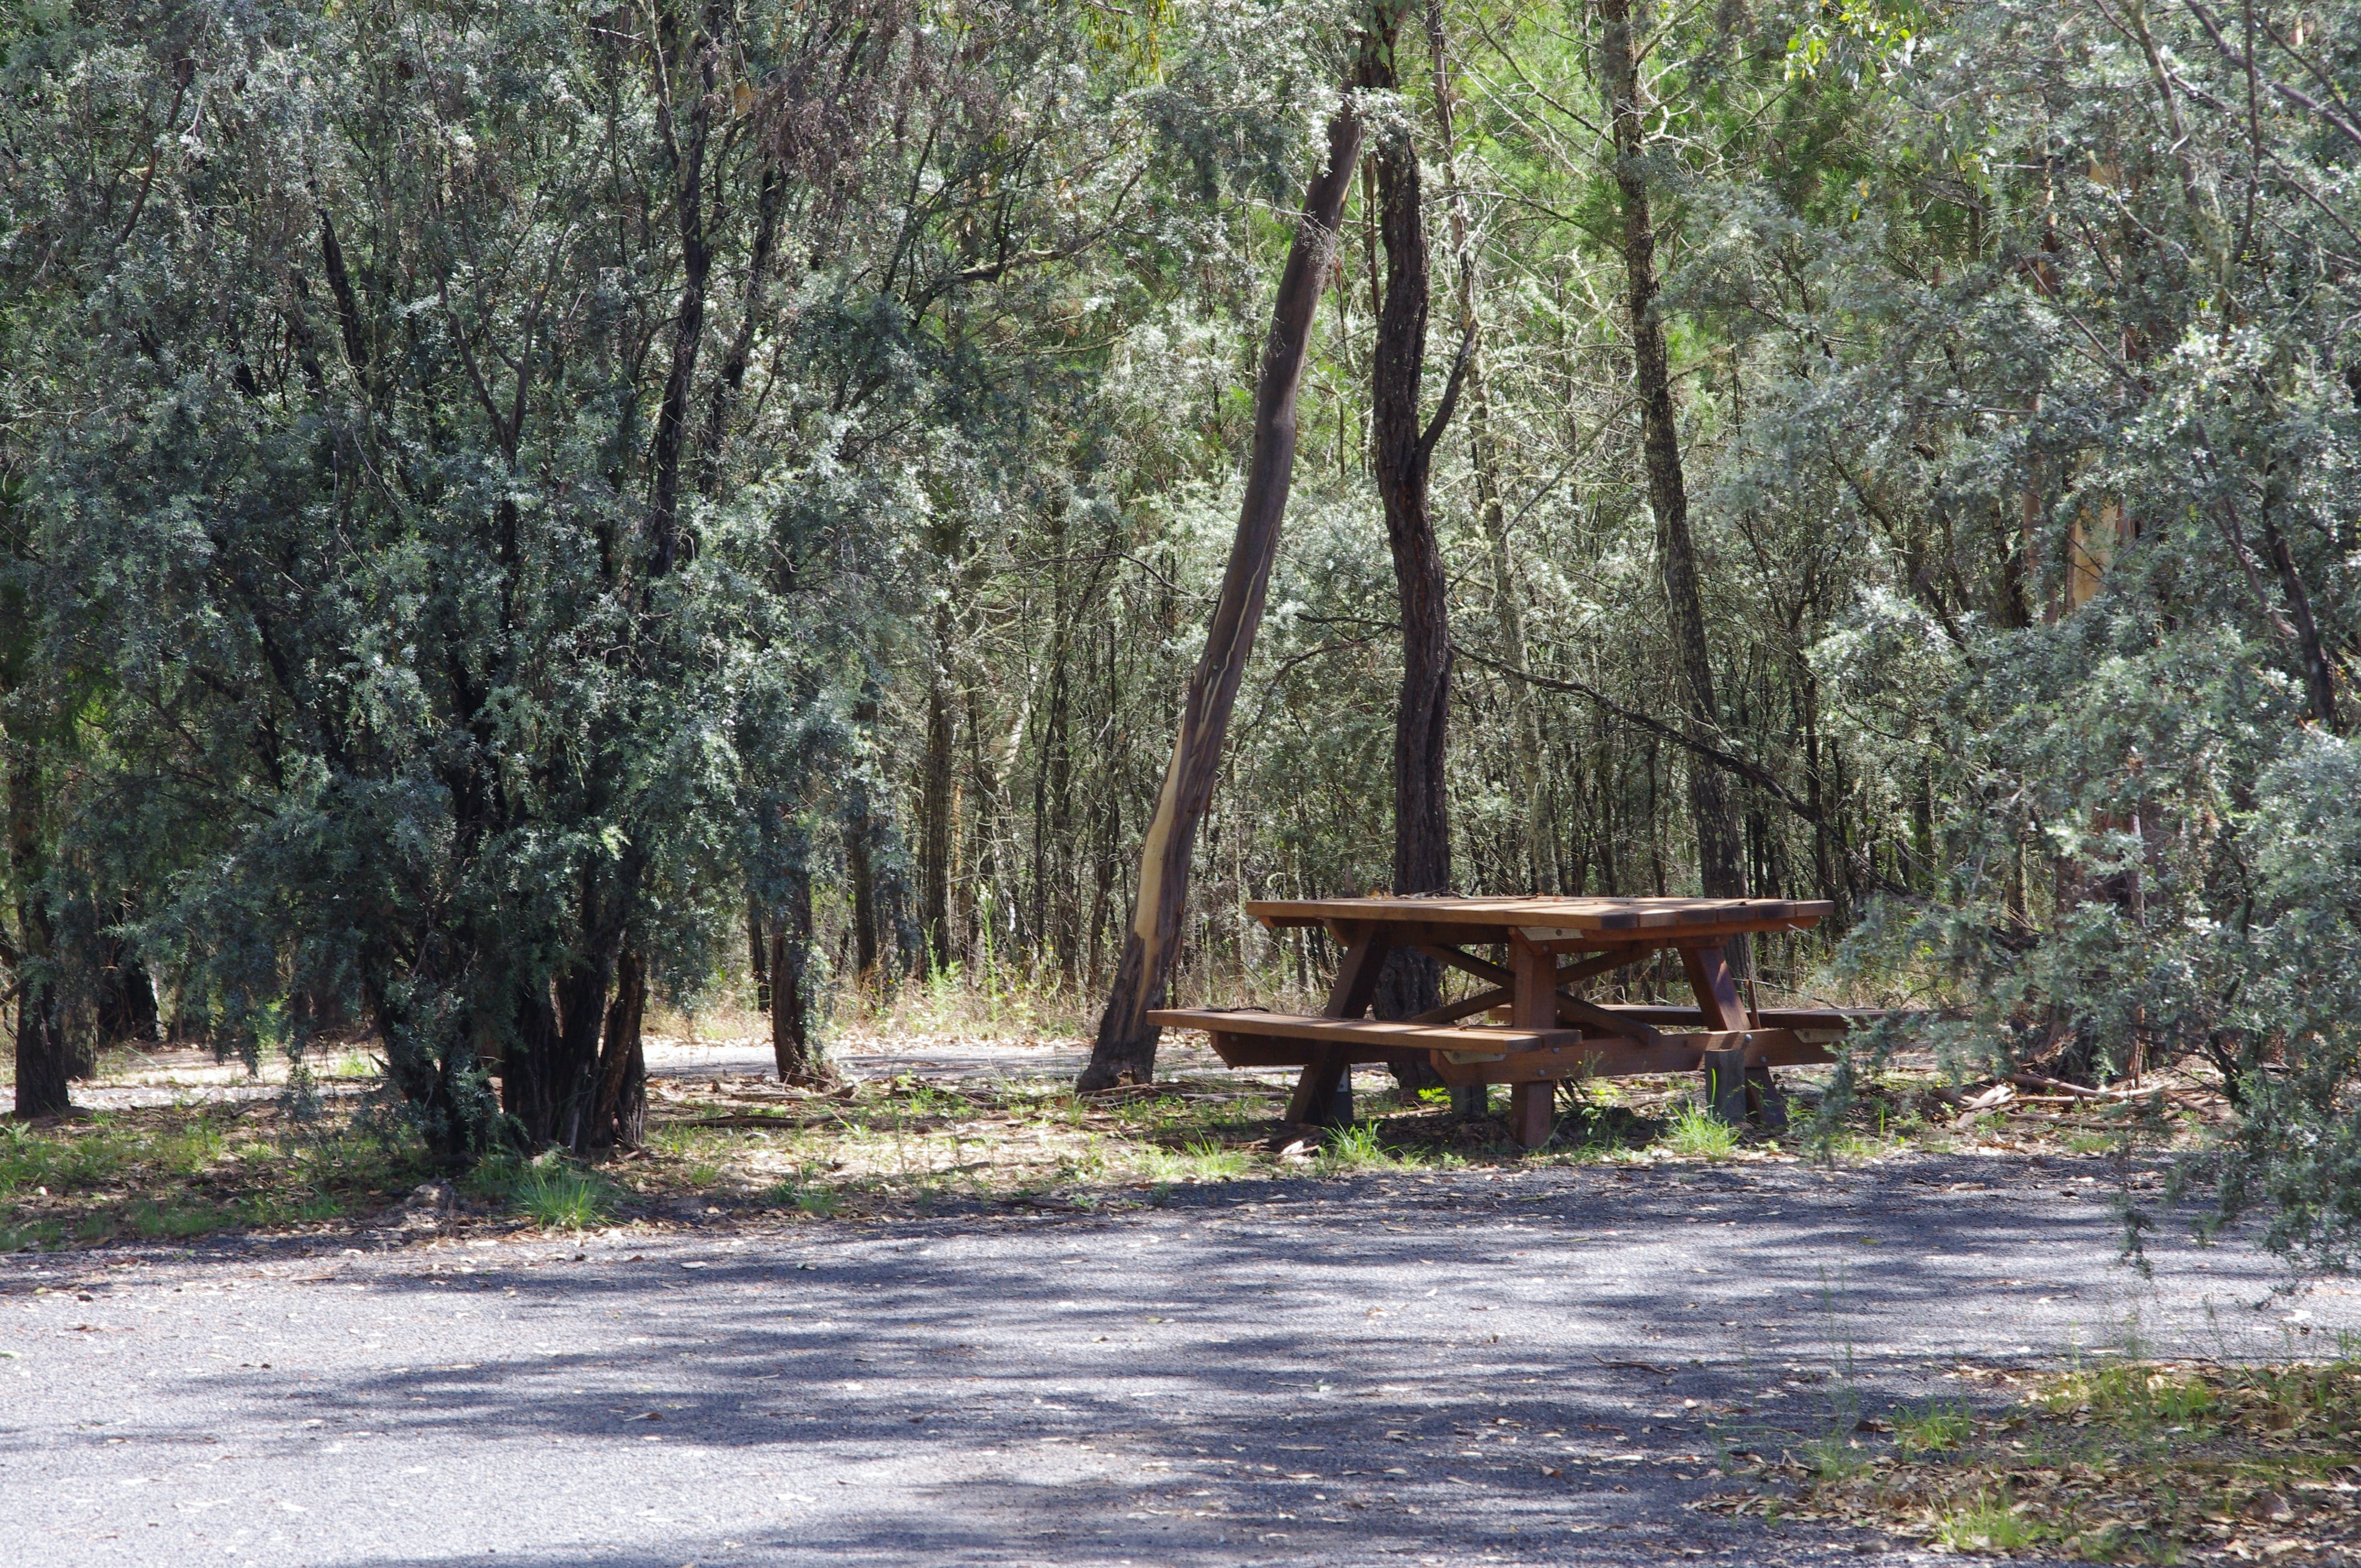 Goonoowigall State Conservation Area - Wagga Wagga Accommodation